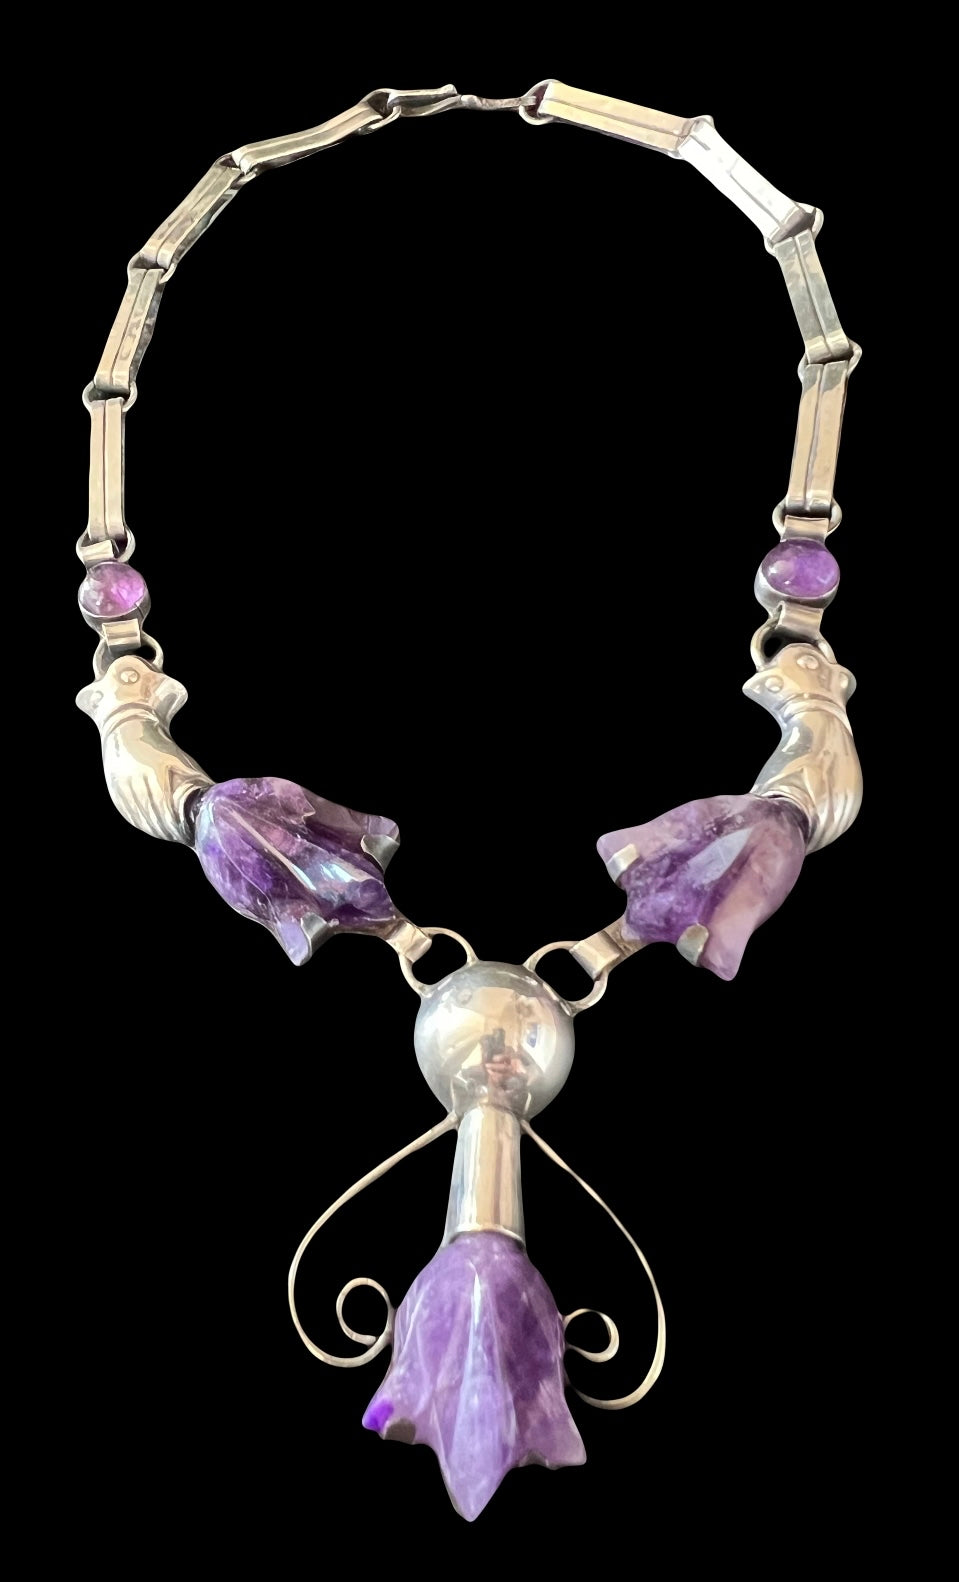 William Spratling Design Taxco Mexico Sterling Silver Amethyst Tulips Hands Necklace 86g